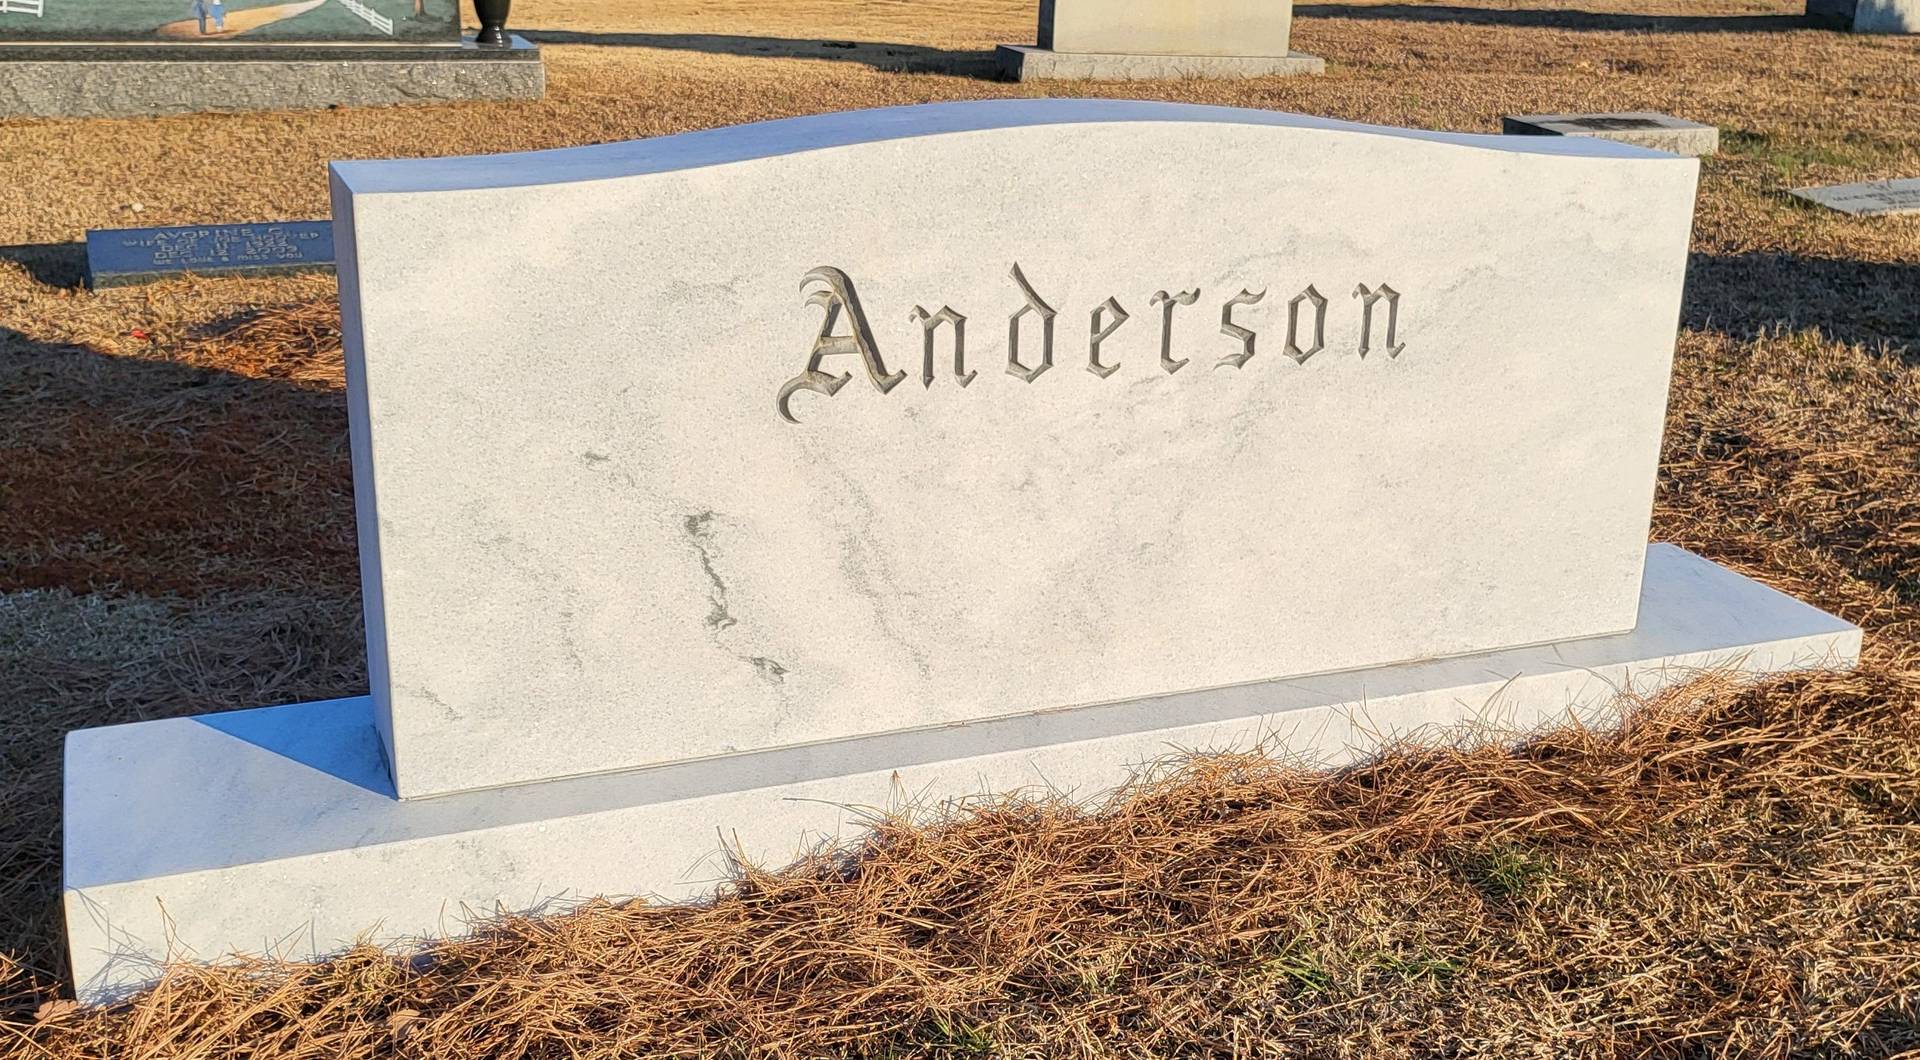 A memorial slab with the name and illustration by the text Anderson